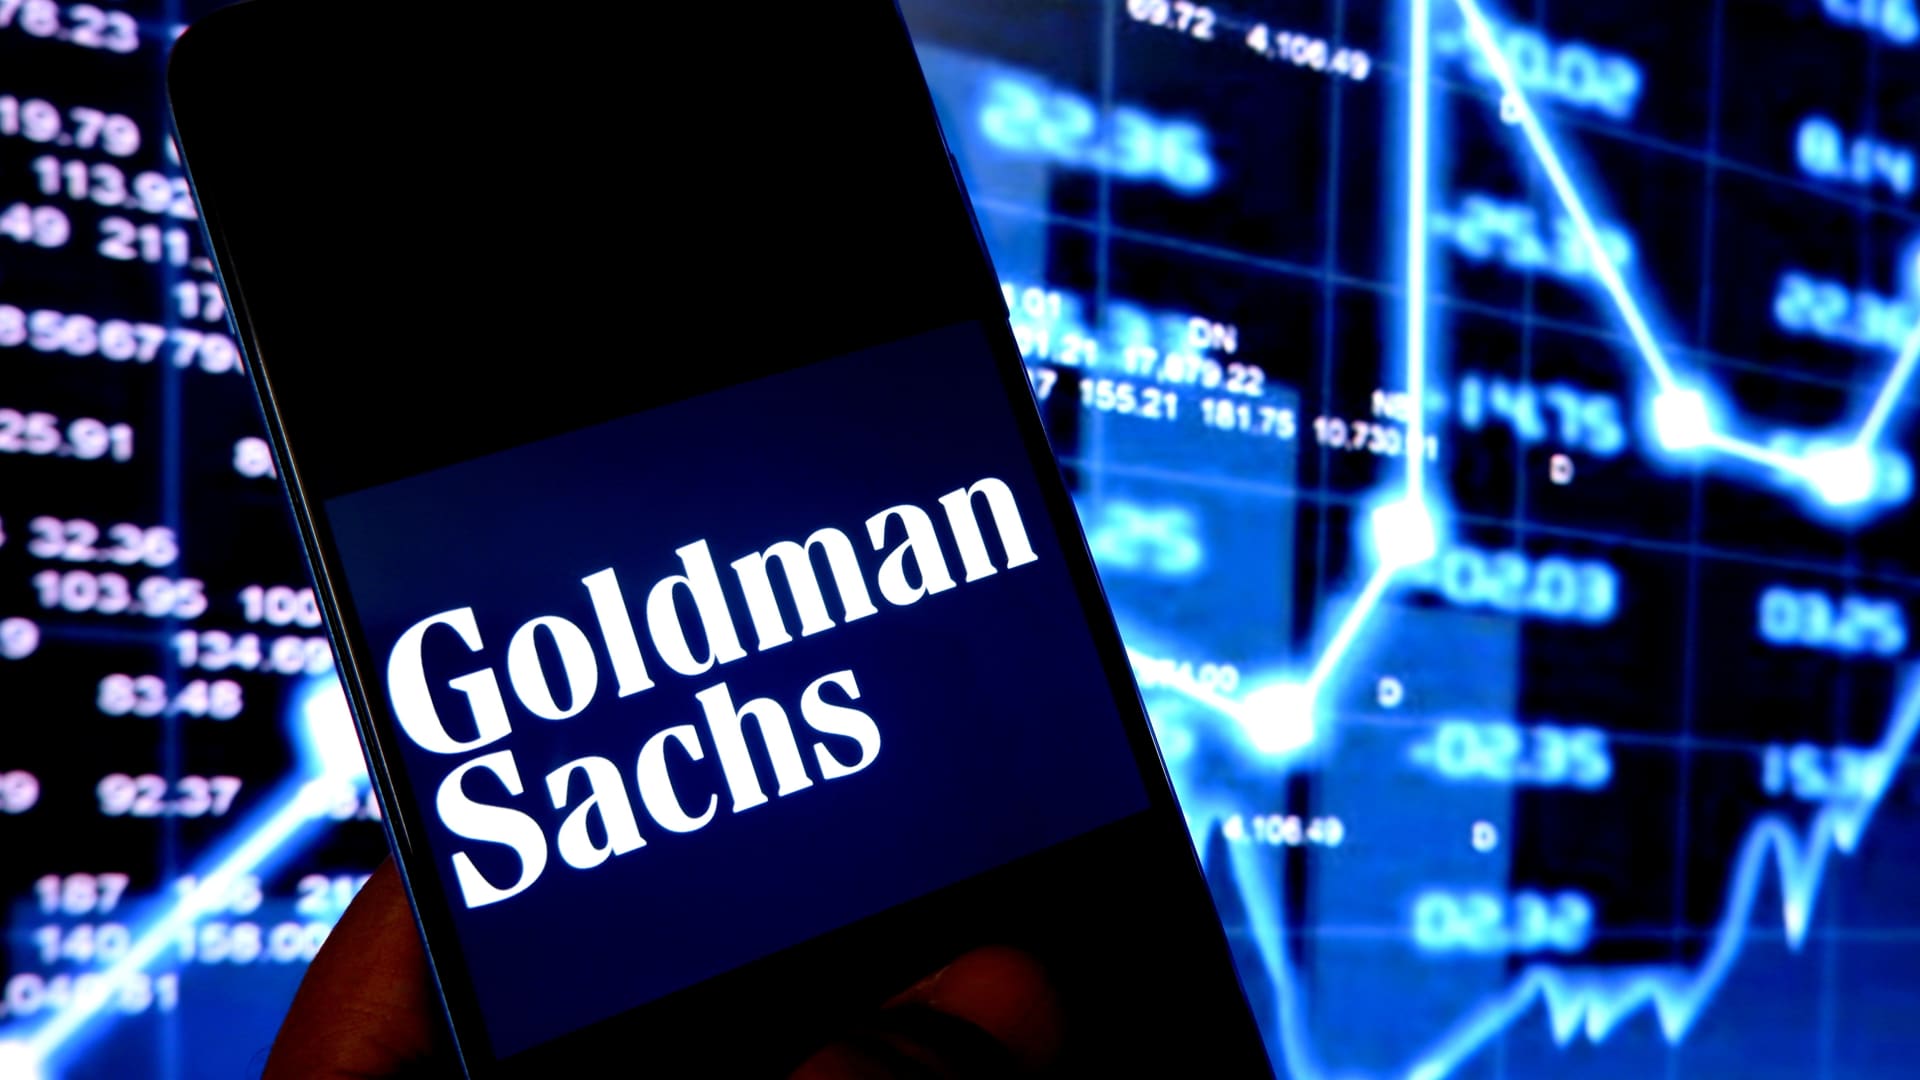 Goldman names Asian shares on its conviction list